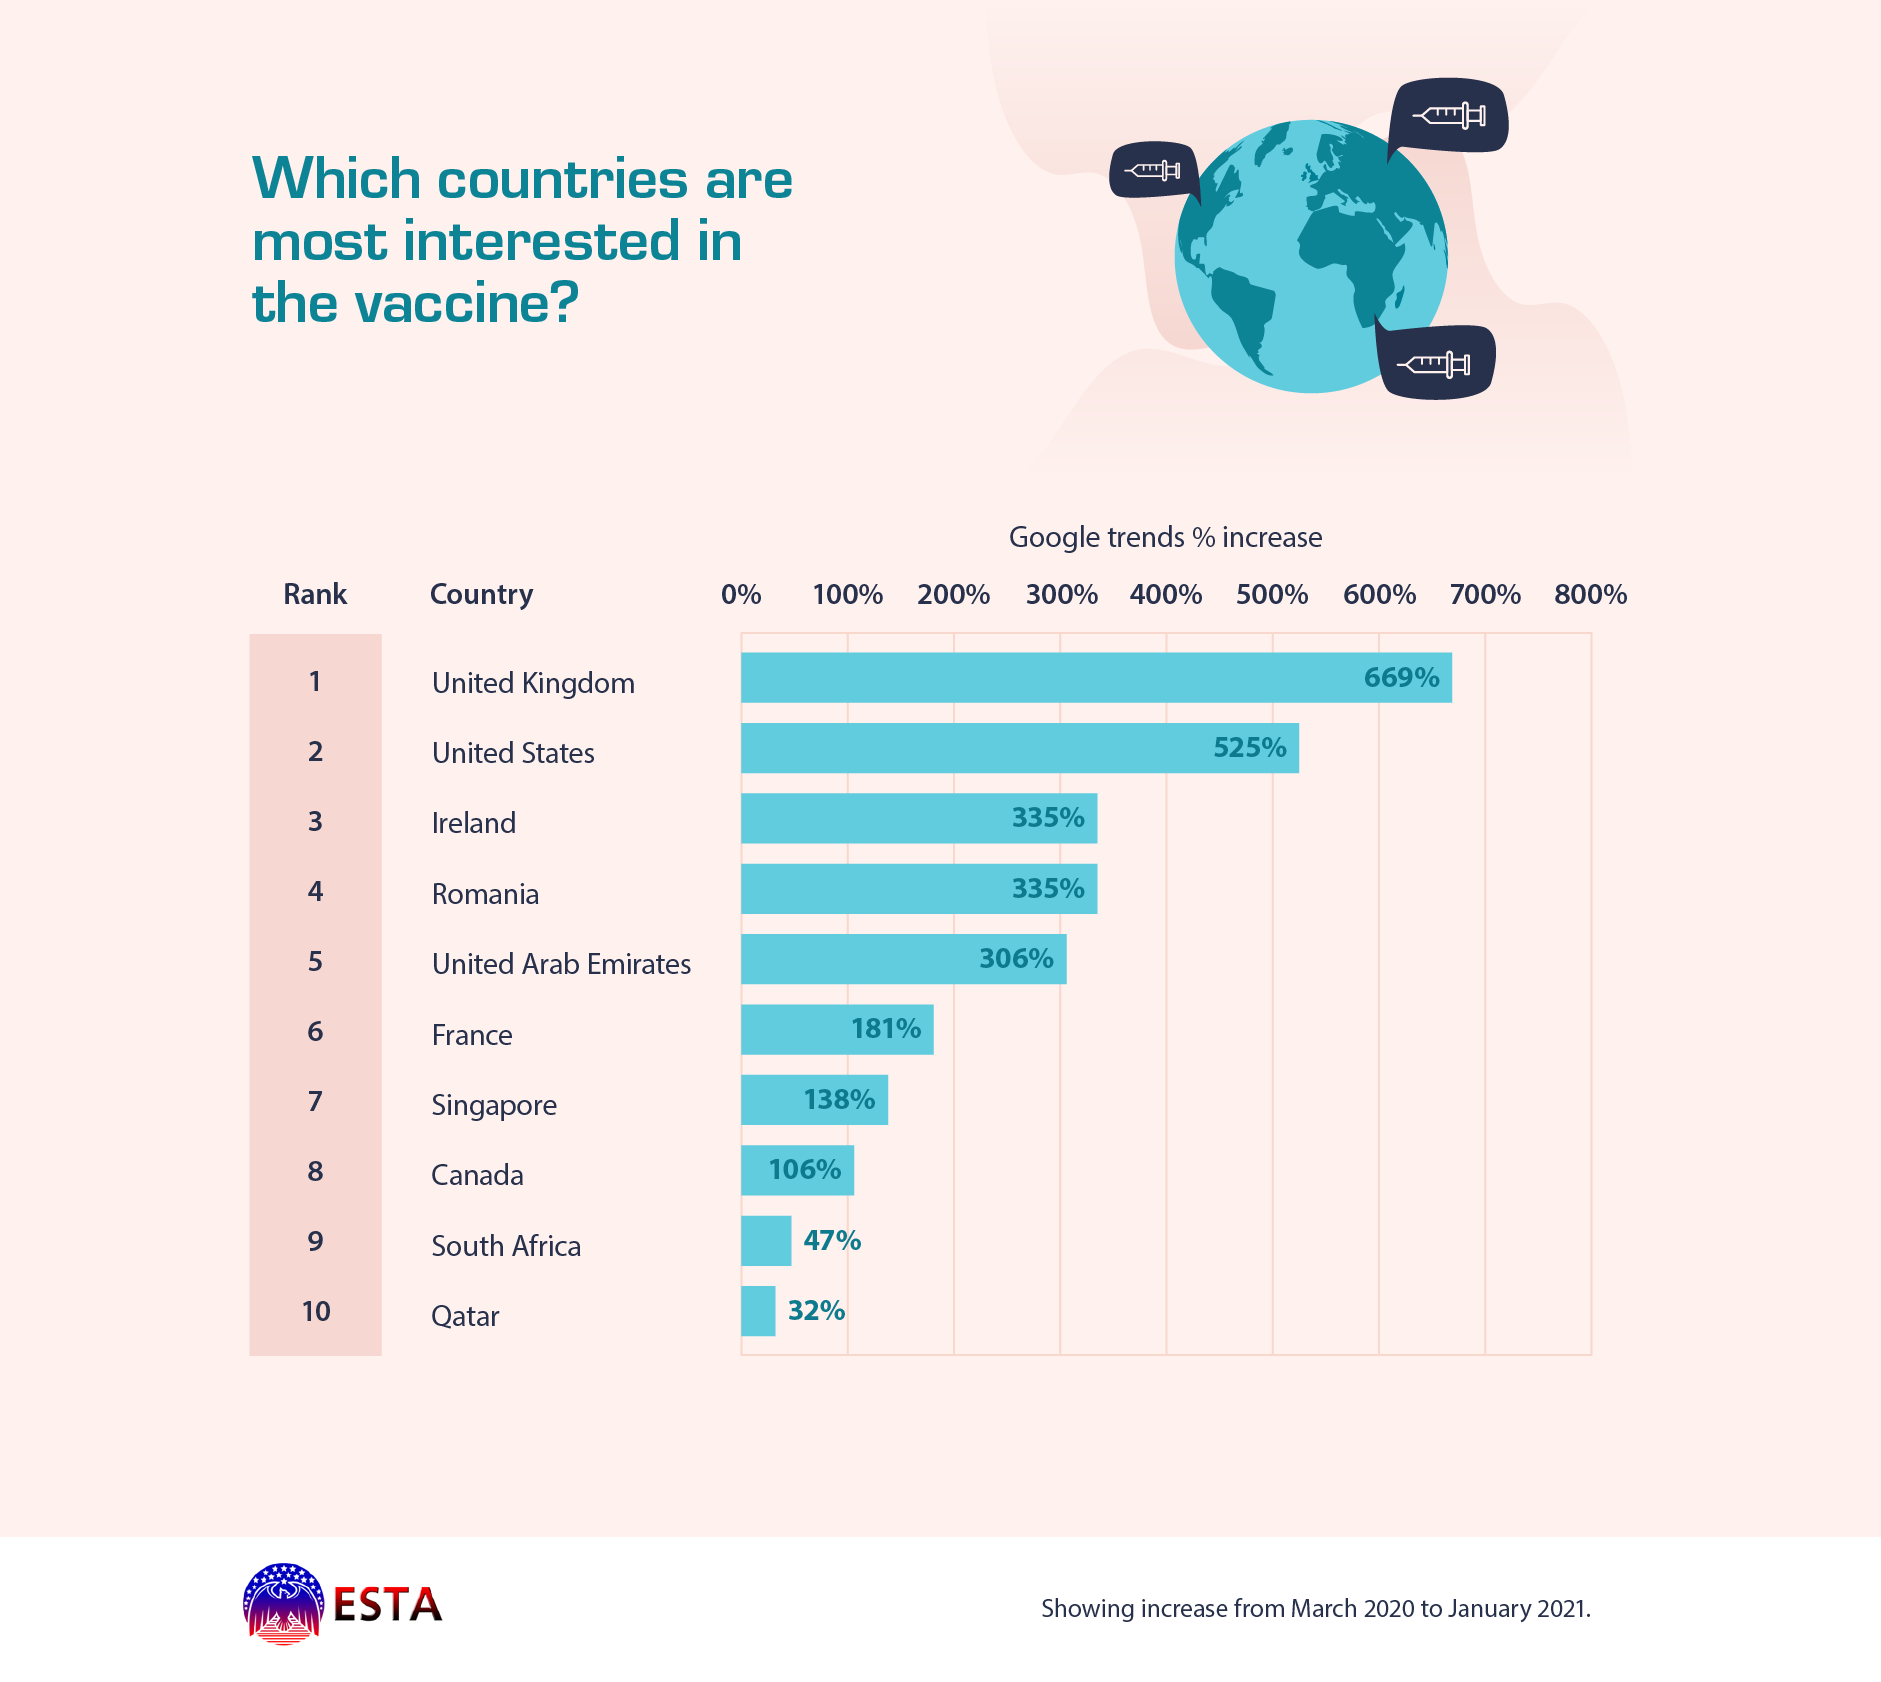 Which countries are most interested in the vaccine?